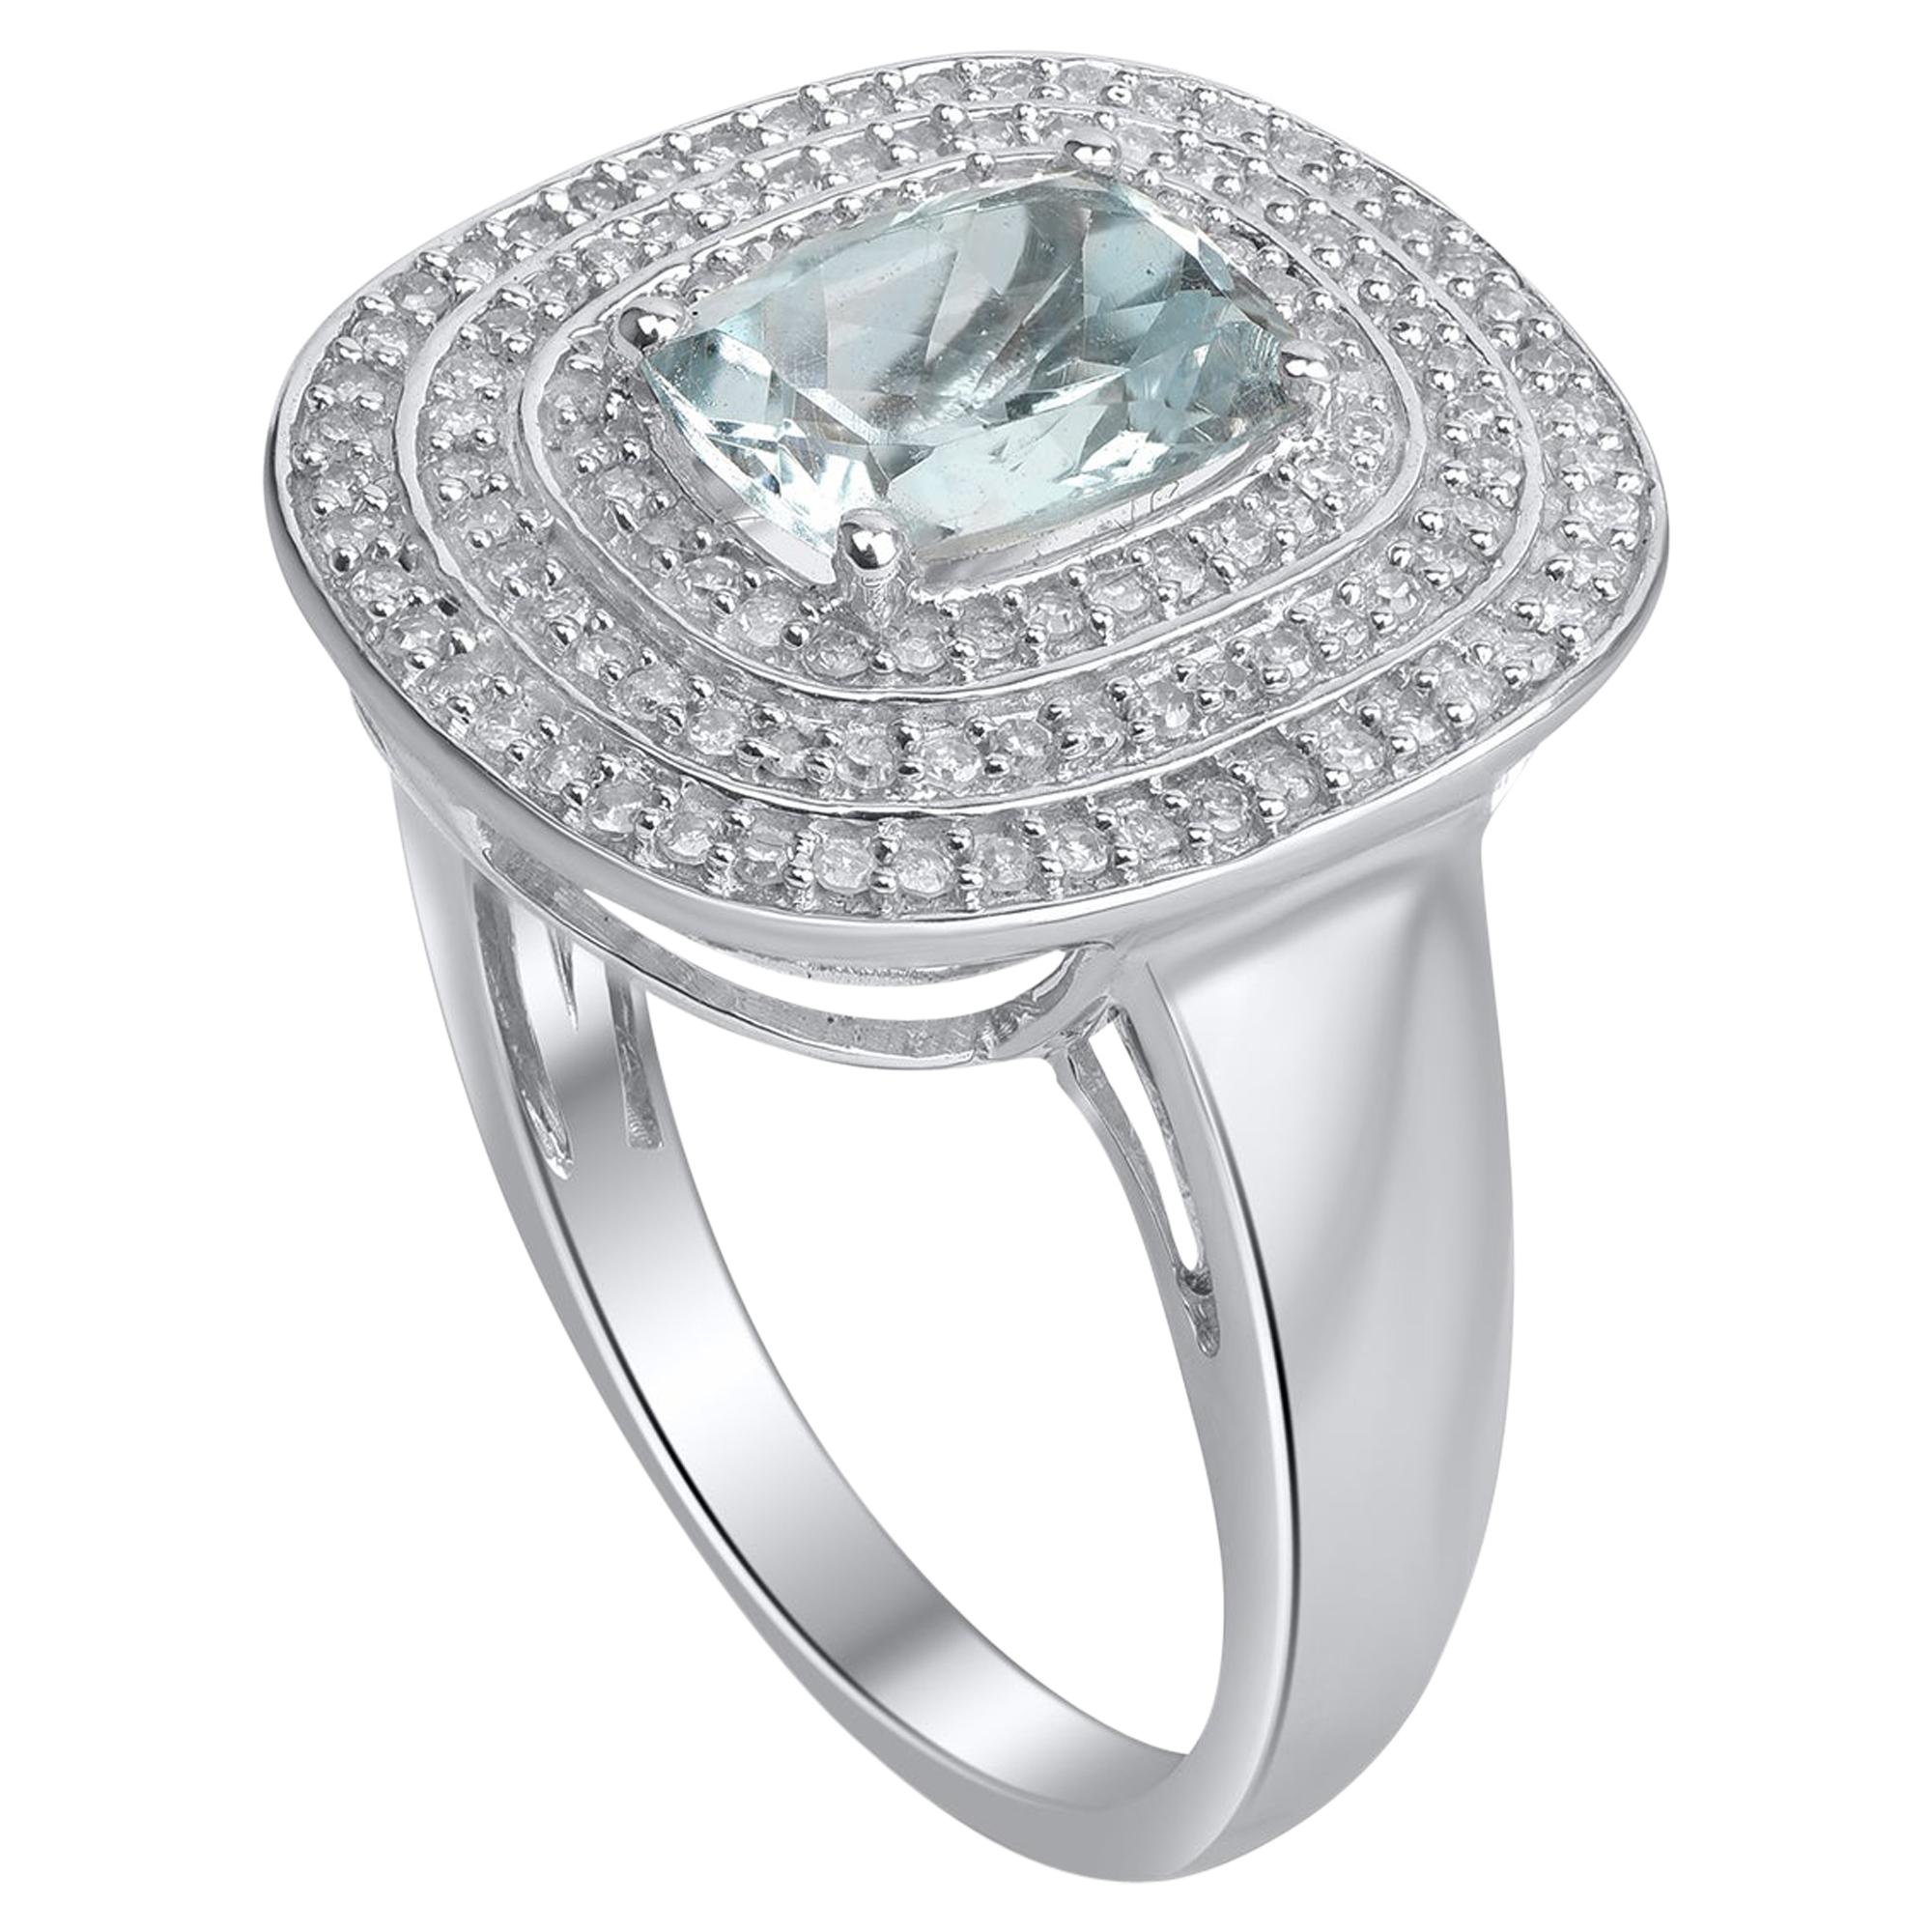 Dazzles with 118 brilliant diamonds and 1 natural aquamarine gemstone in pave setting and fashioned in 14-karat white gold. Diamonds are graded HI color, I2 clarity. 
